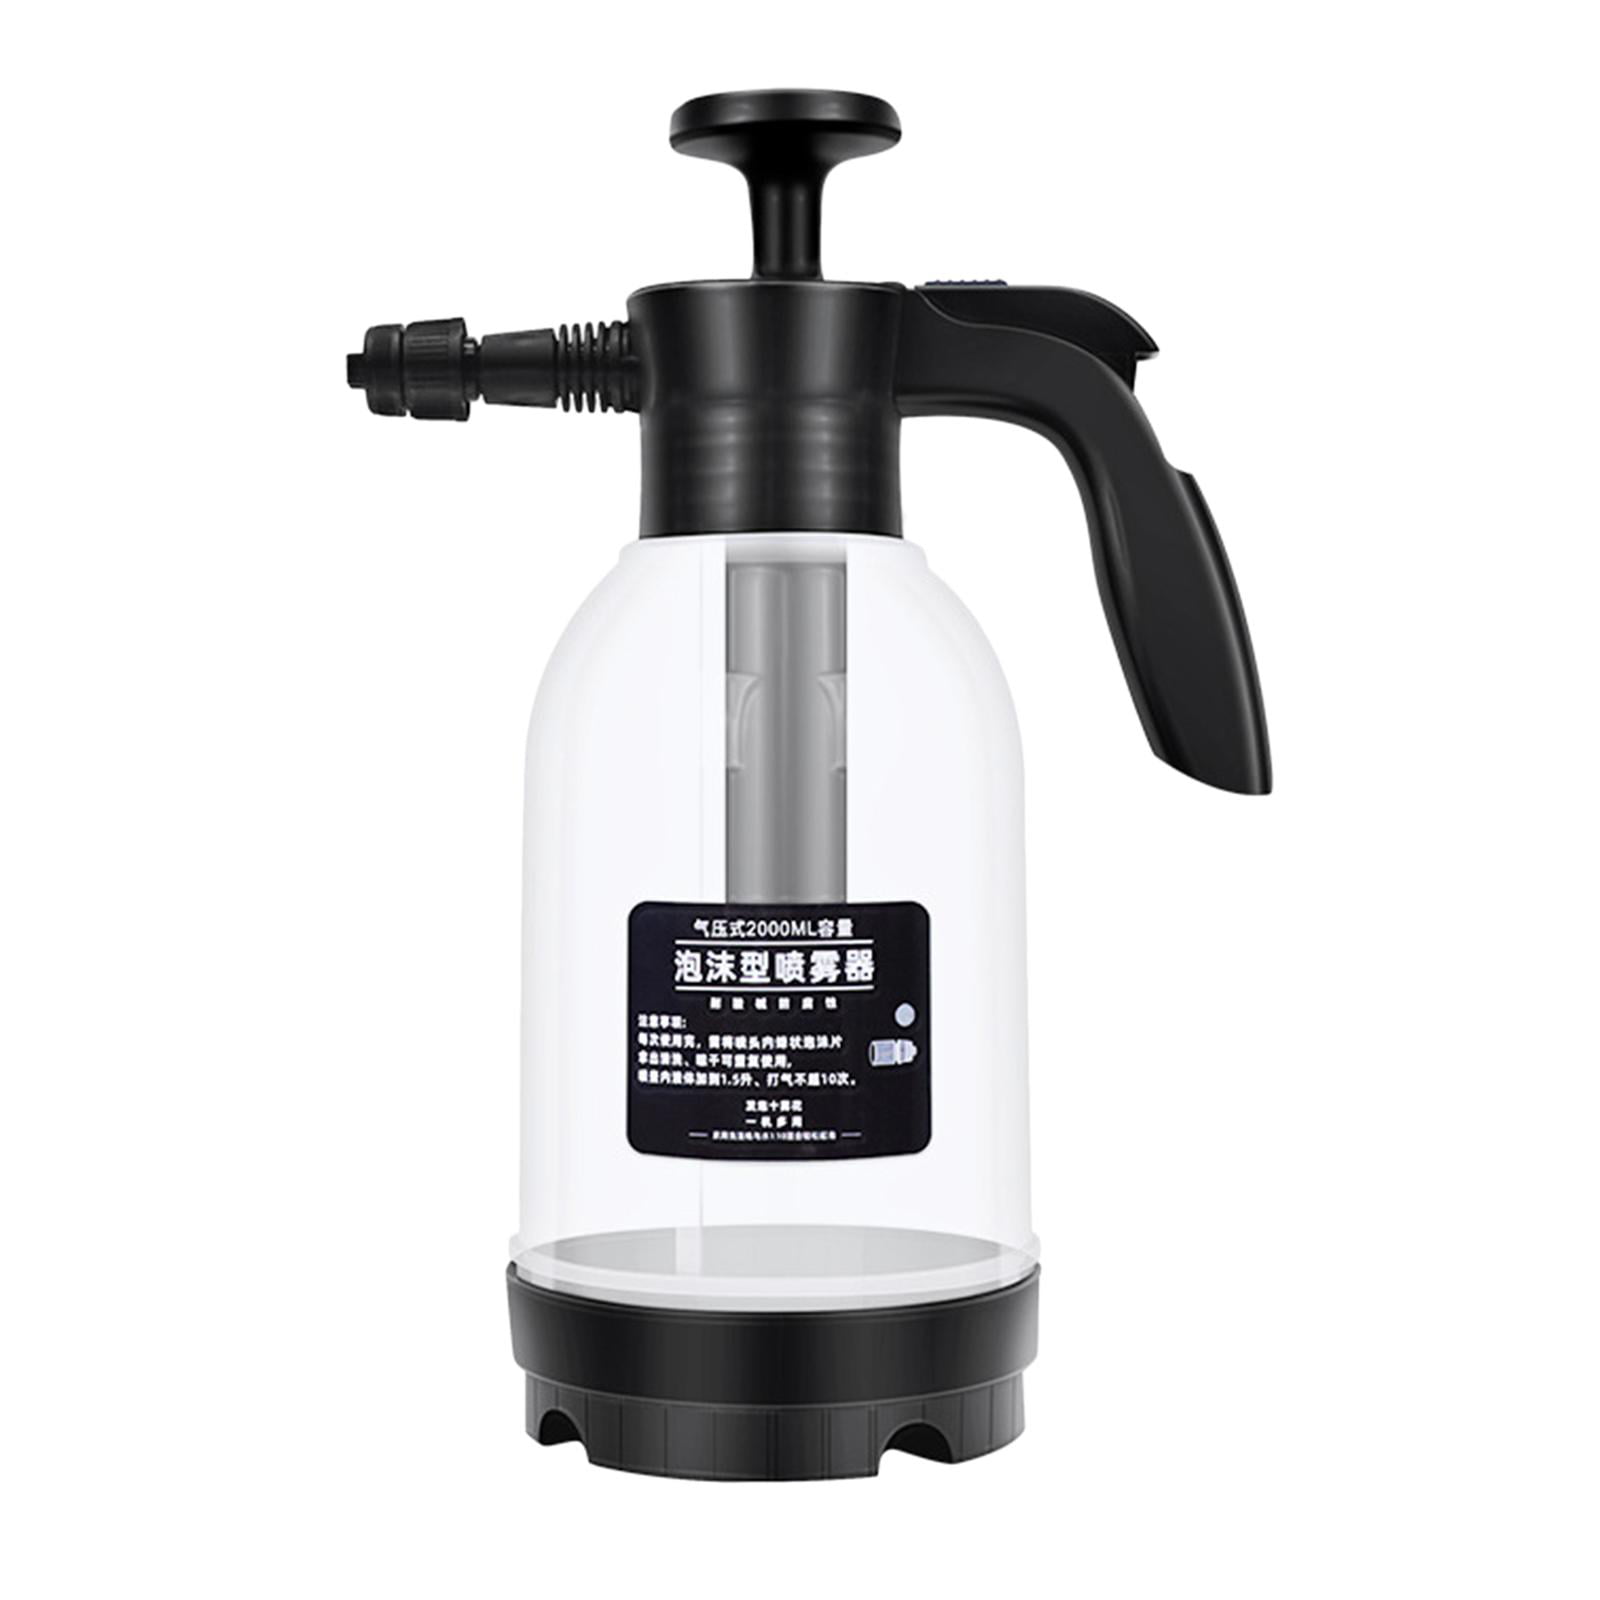  Car Wash Foam Sprayer, 0.4 Gallon Pump Sprayer with Safety  Valve, Ideal for Home Cleaning and Car Detailing, 1.5 L Capacity :  Automotive